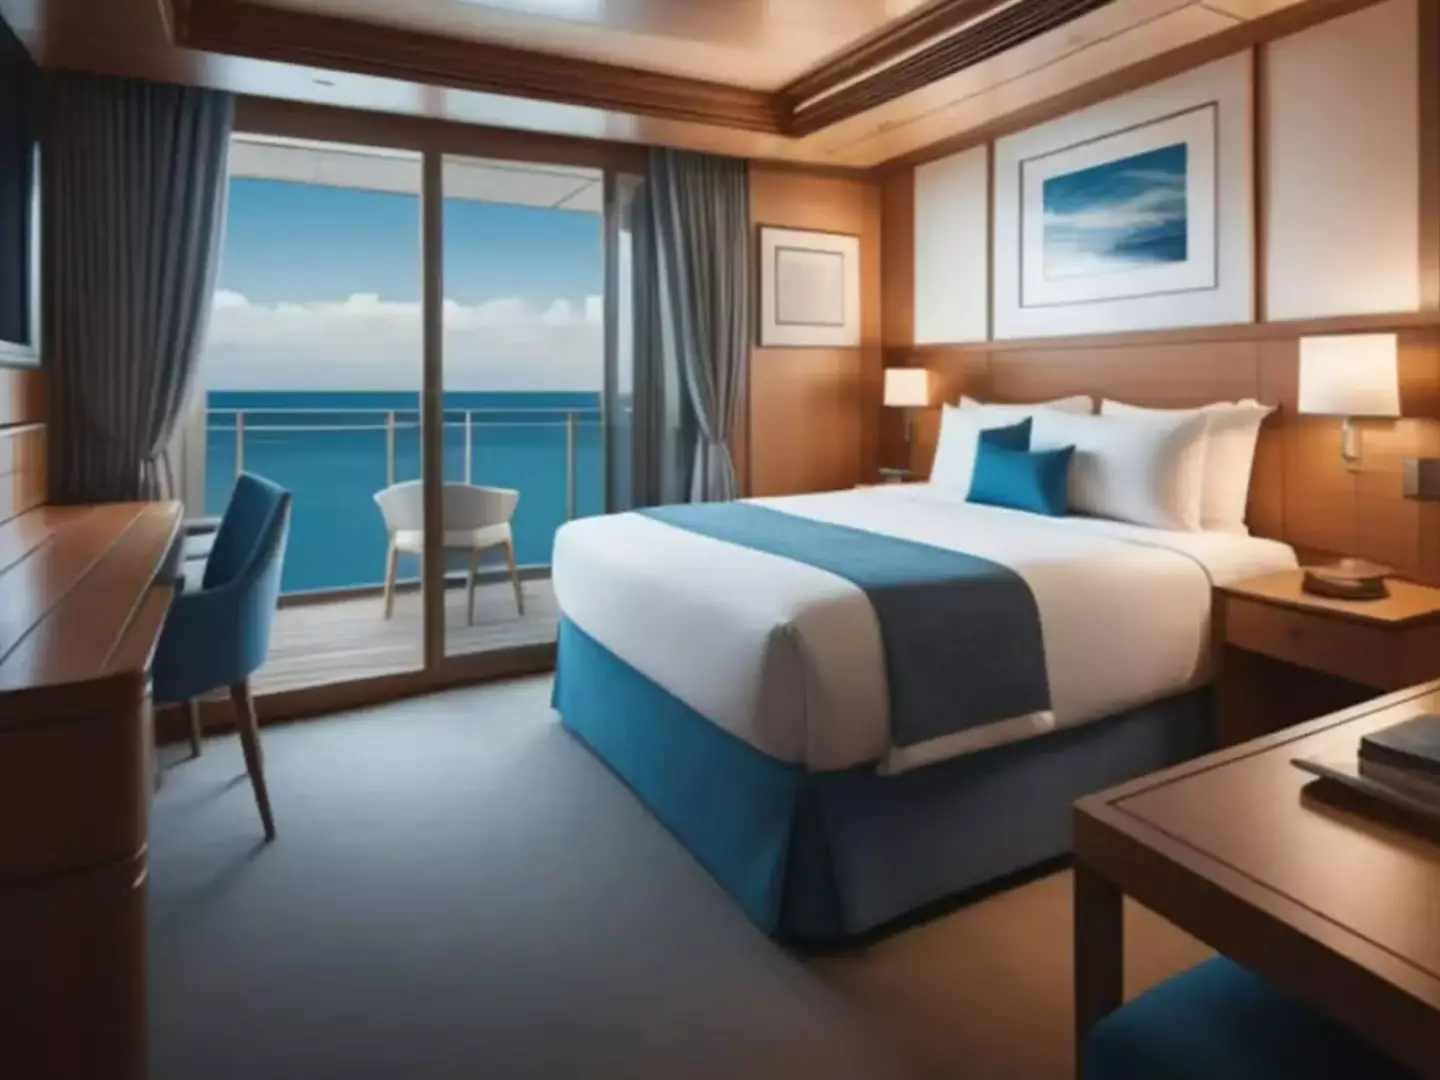 There are also cabins with a balcony over the sea.